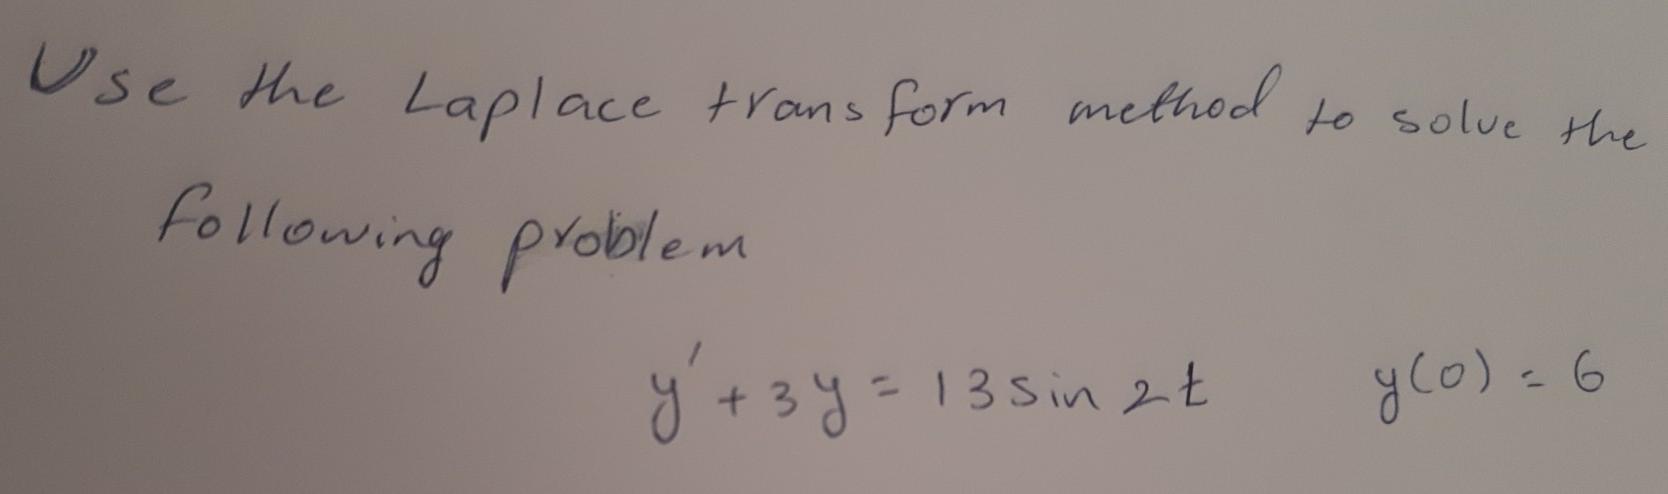 Transform Method To Solve The Use The Laplace Following Problem Y 3y 13 Sin 2t G 0 6 1